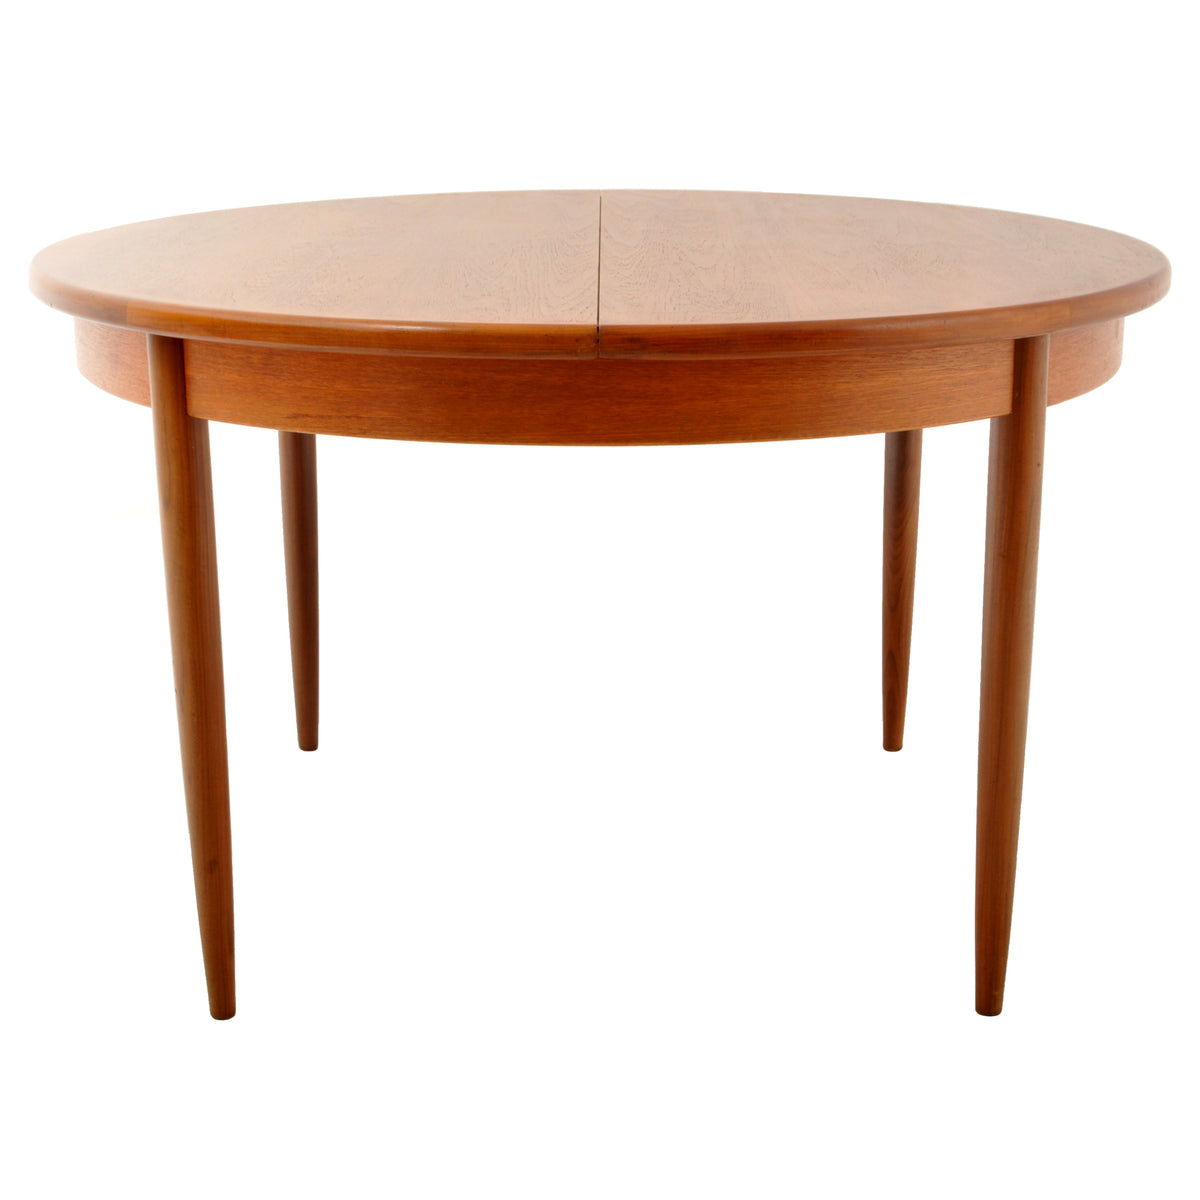 Mid-Century Modern Danish Style Teak Extension Dining Table by G Plan, 1960s